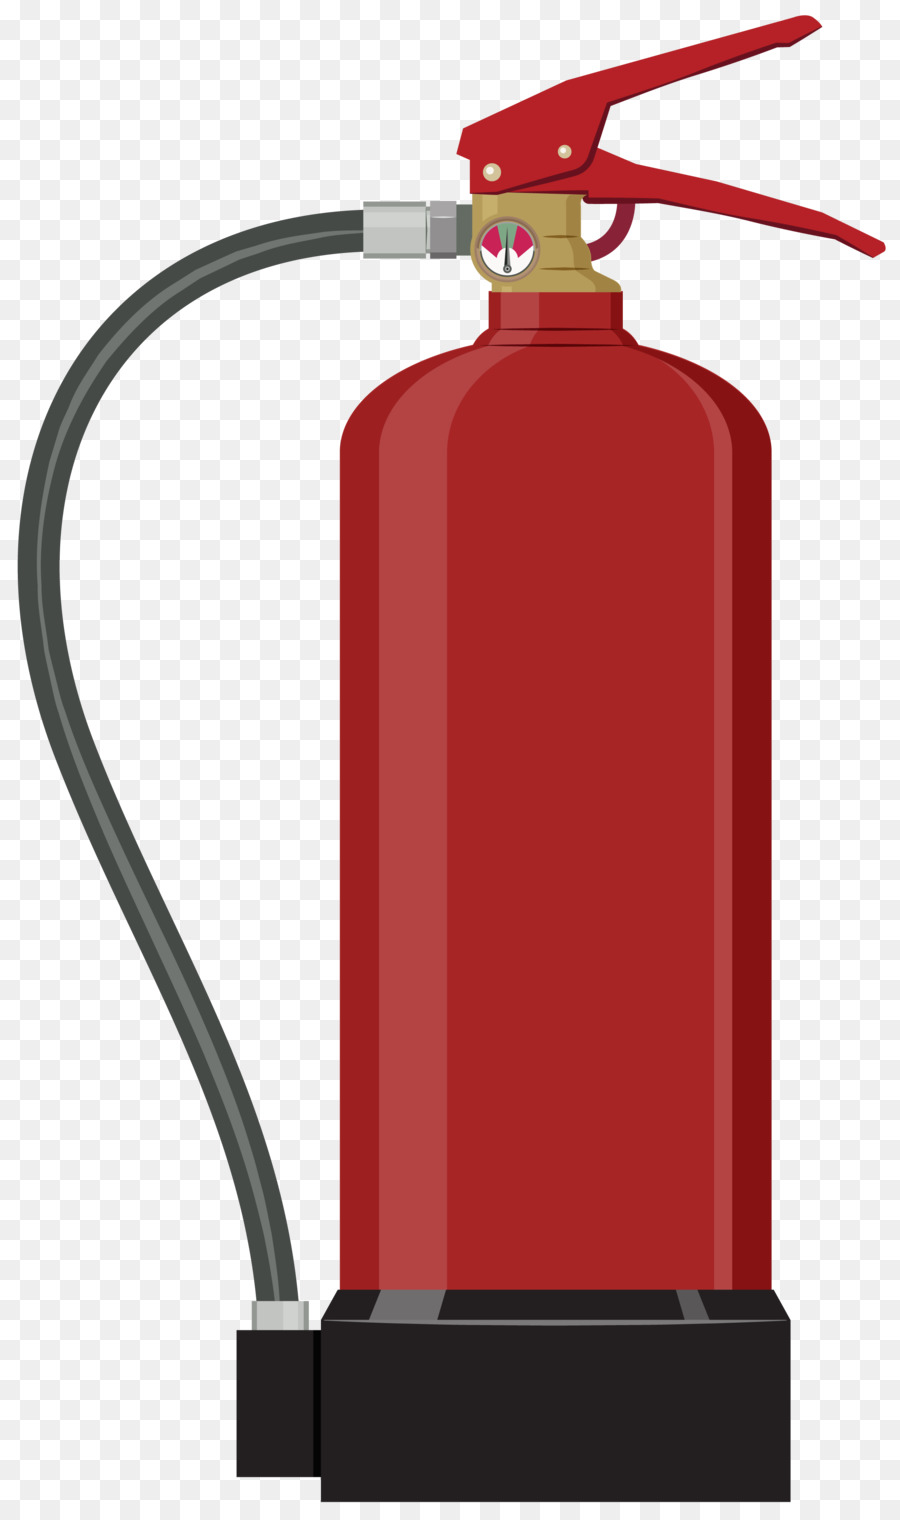 Fire Extinguisher Clipart png download.